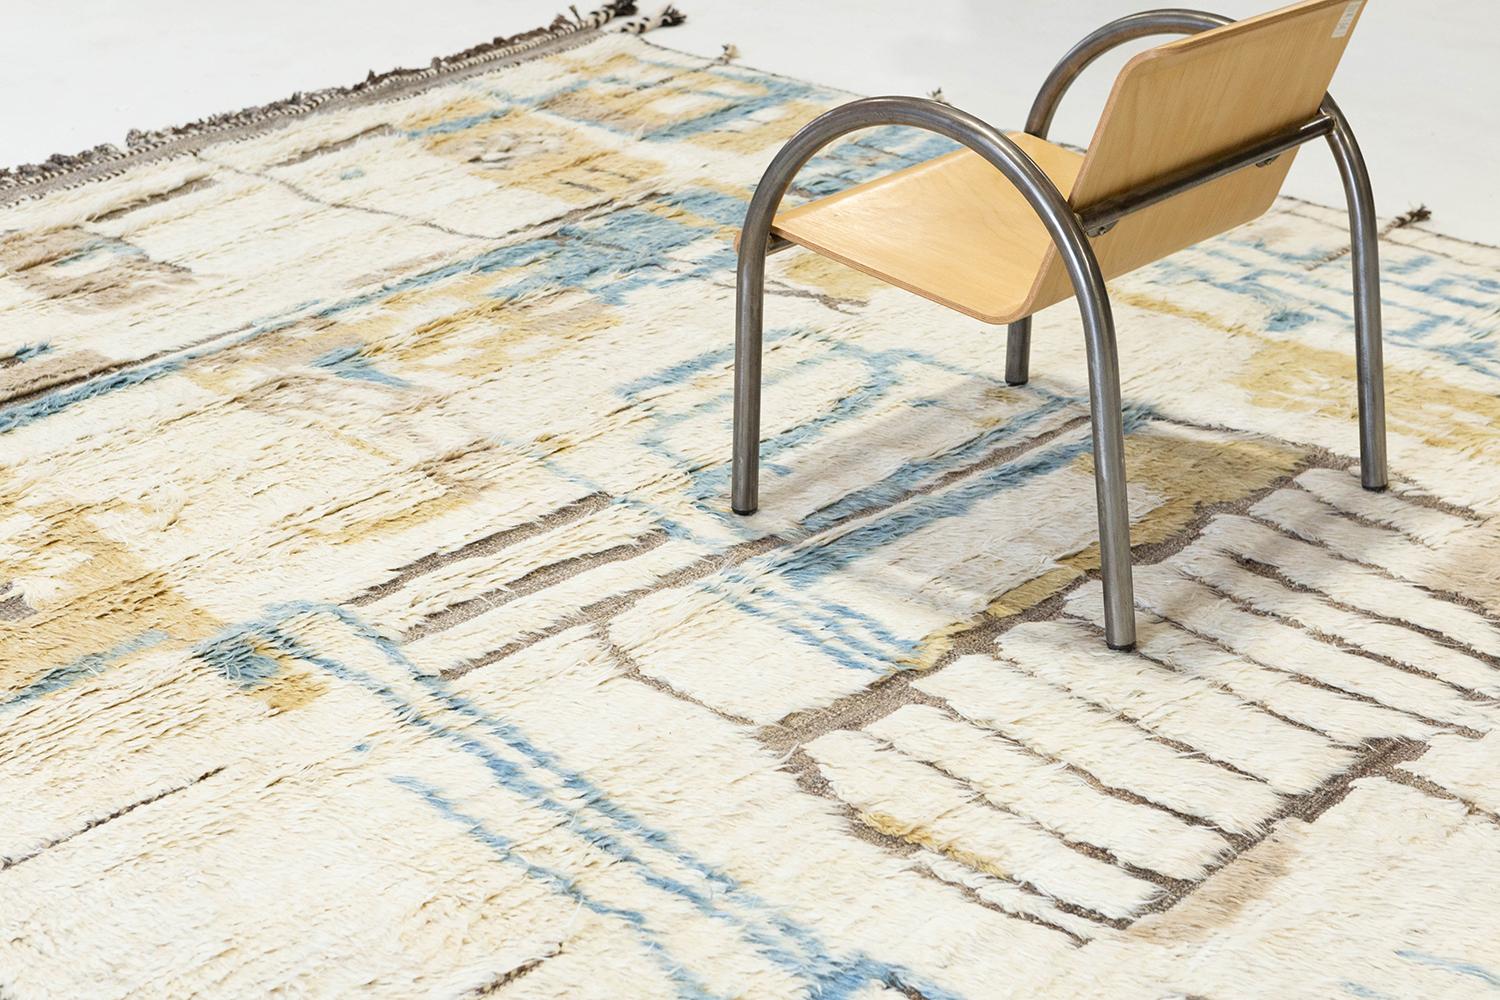 Meliska' is a beautifully textured rug with irregular motifs inspired from the Atlas Mountains of Morocco. Natural blush, golden yellow, and blue surrounded by ivory shag work cohesively to make for a great contemporary interpretation for the modern